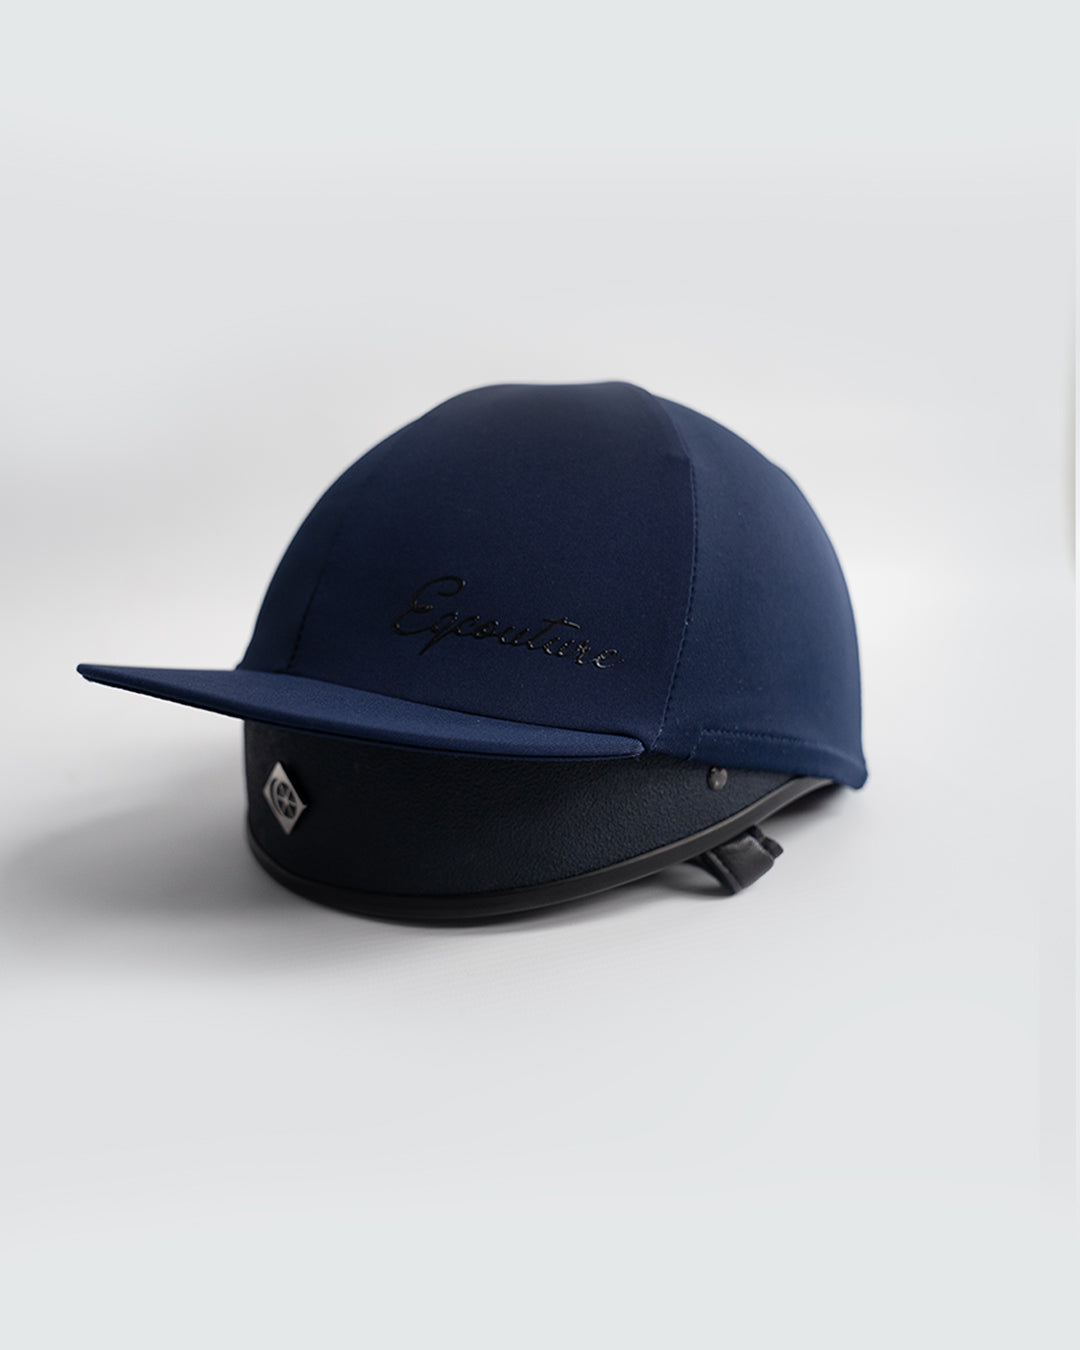 Deluxe Hat Silk with Removable Pom Pom - NAVY